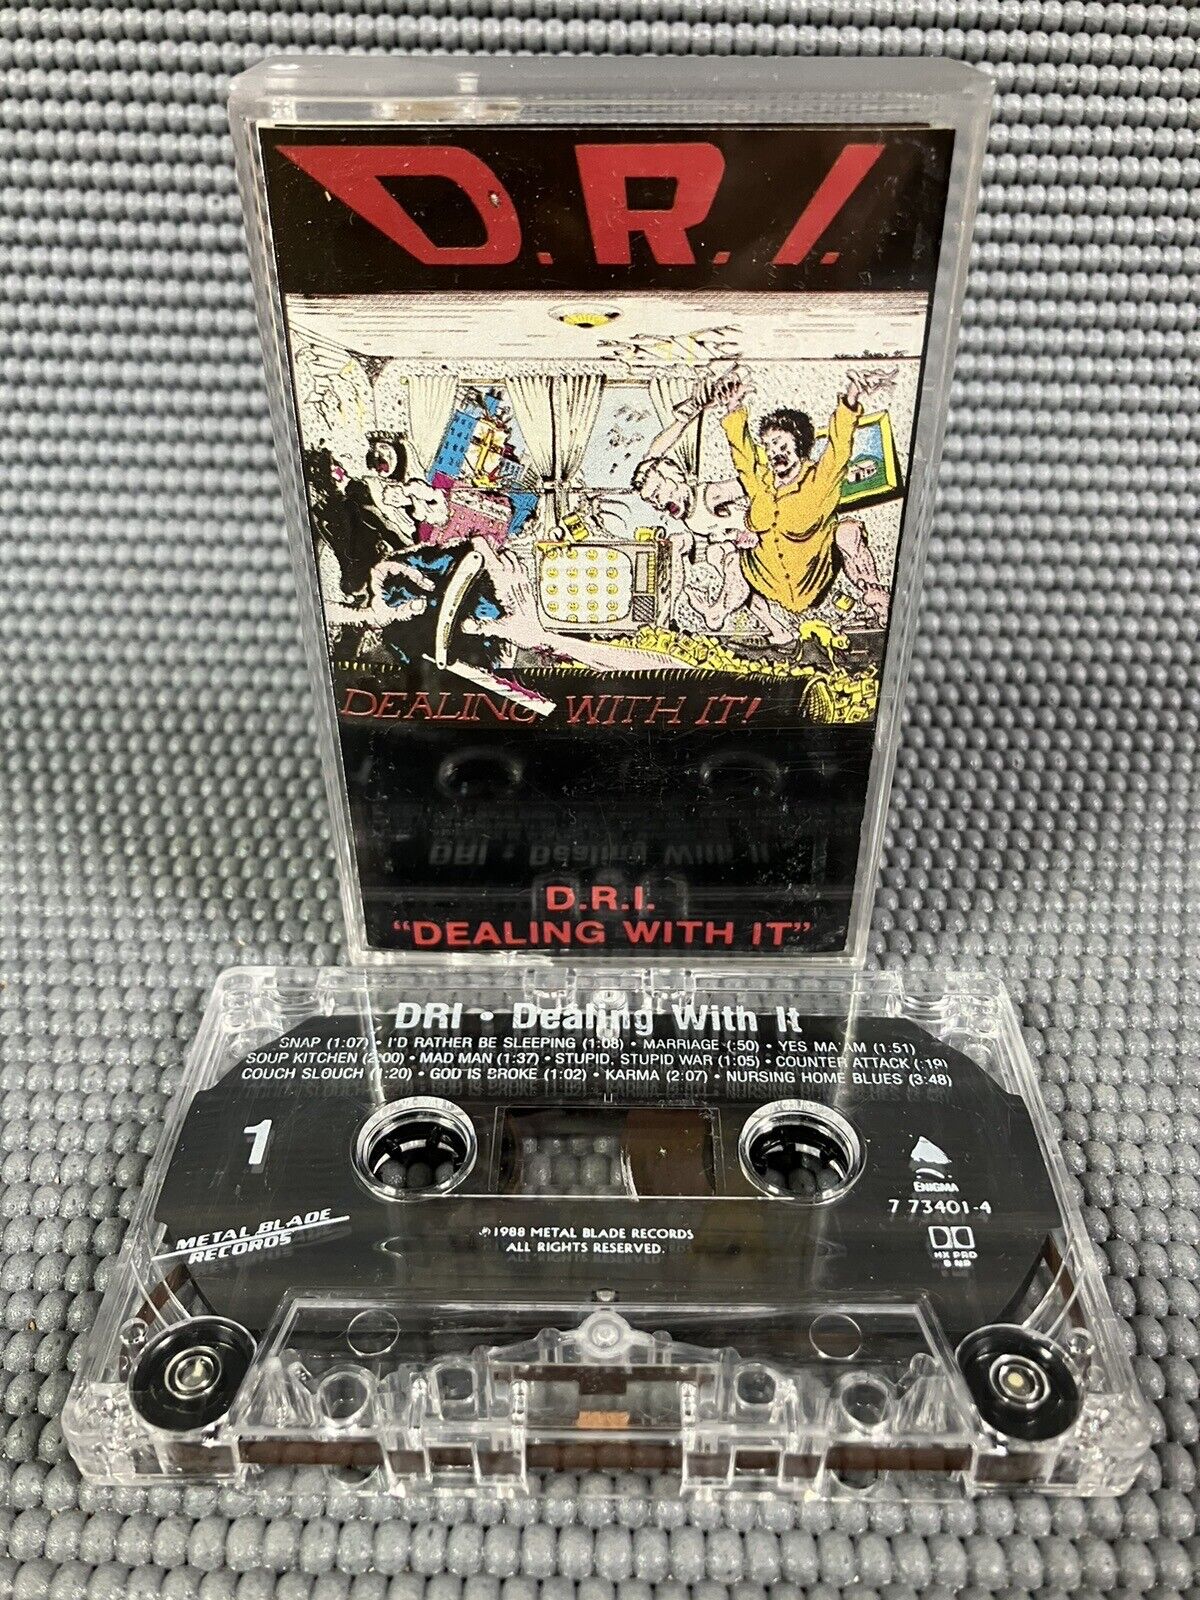 DRI Cassette Tape DEALING WITH IT 1985 CLEAR SHELL Punk Hardcore - Tested